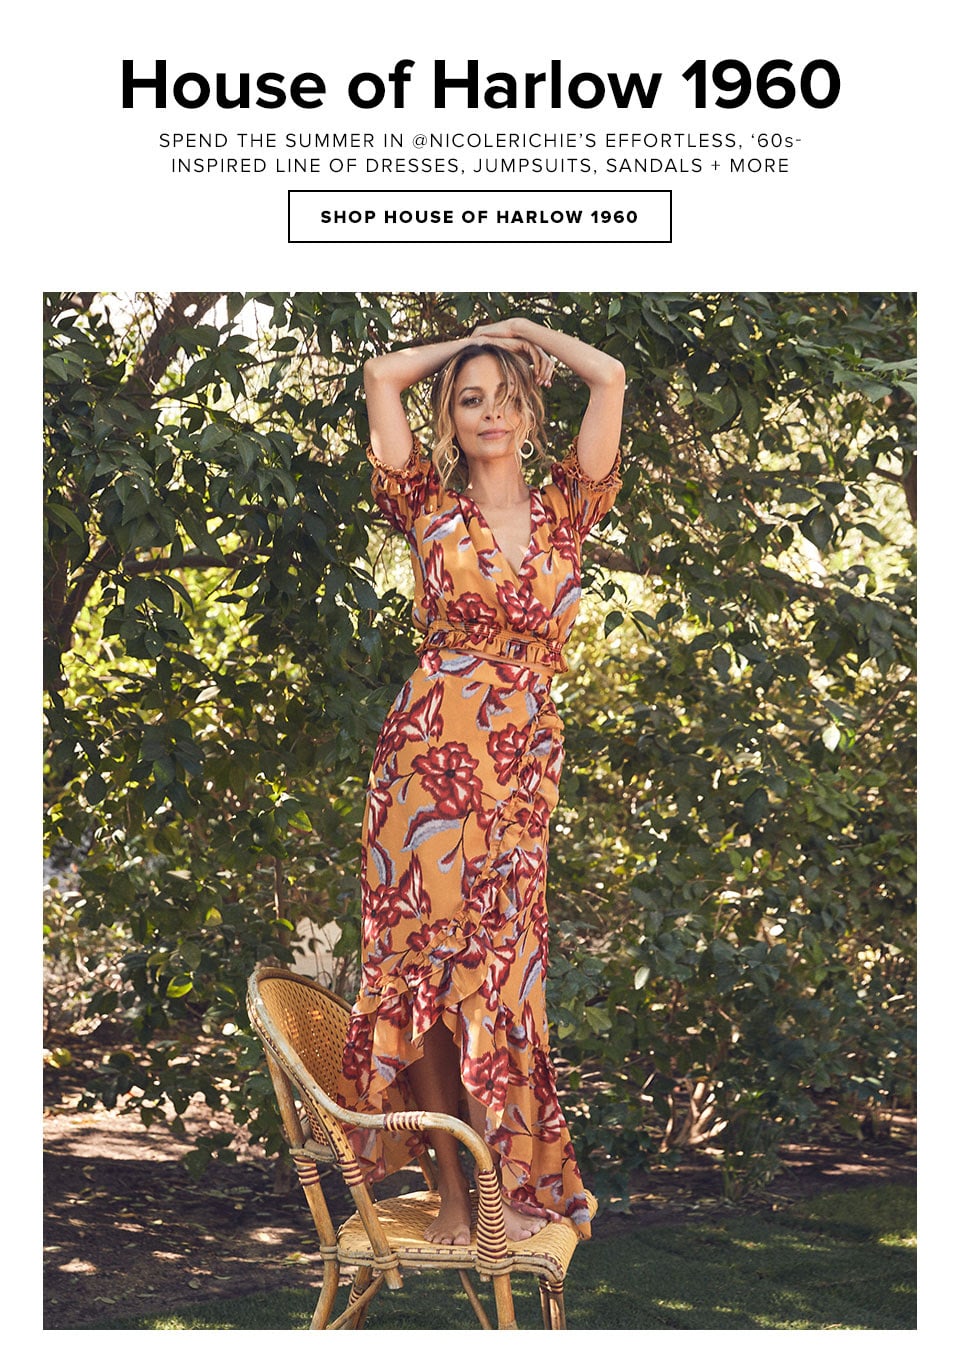 House of Harlow 1960. Spend the summer in @nicolerichie’s effortless, ‘60s-inspired line of dresses, jumpsuits, sandals + more. Shop House Of Harlow 1960.